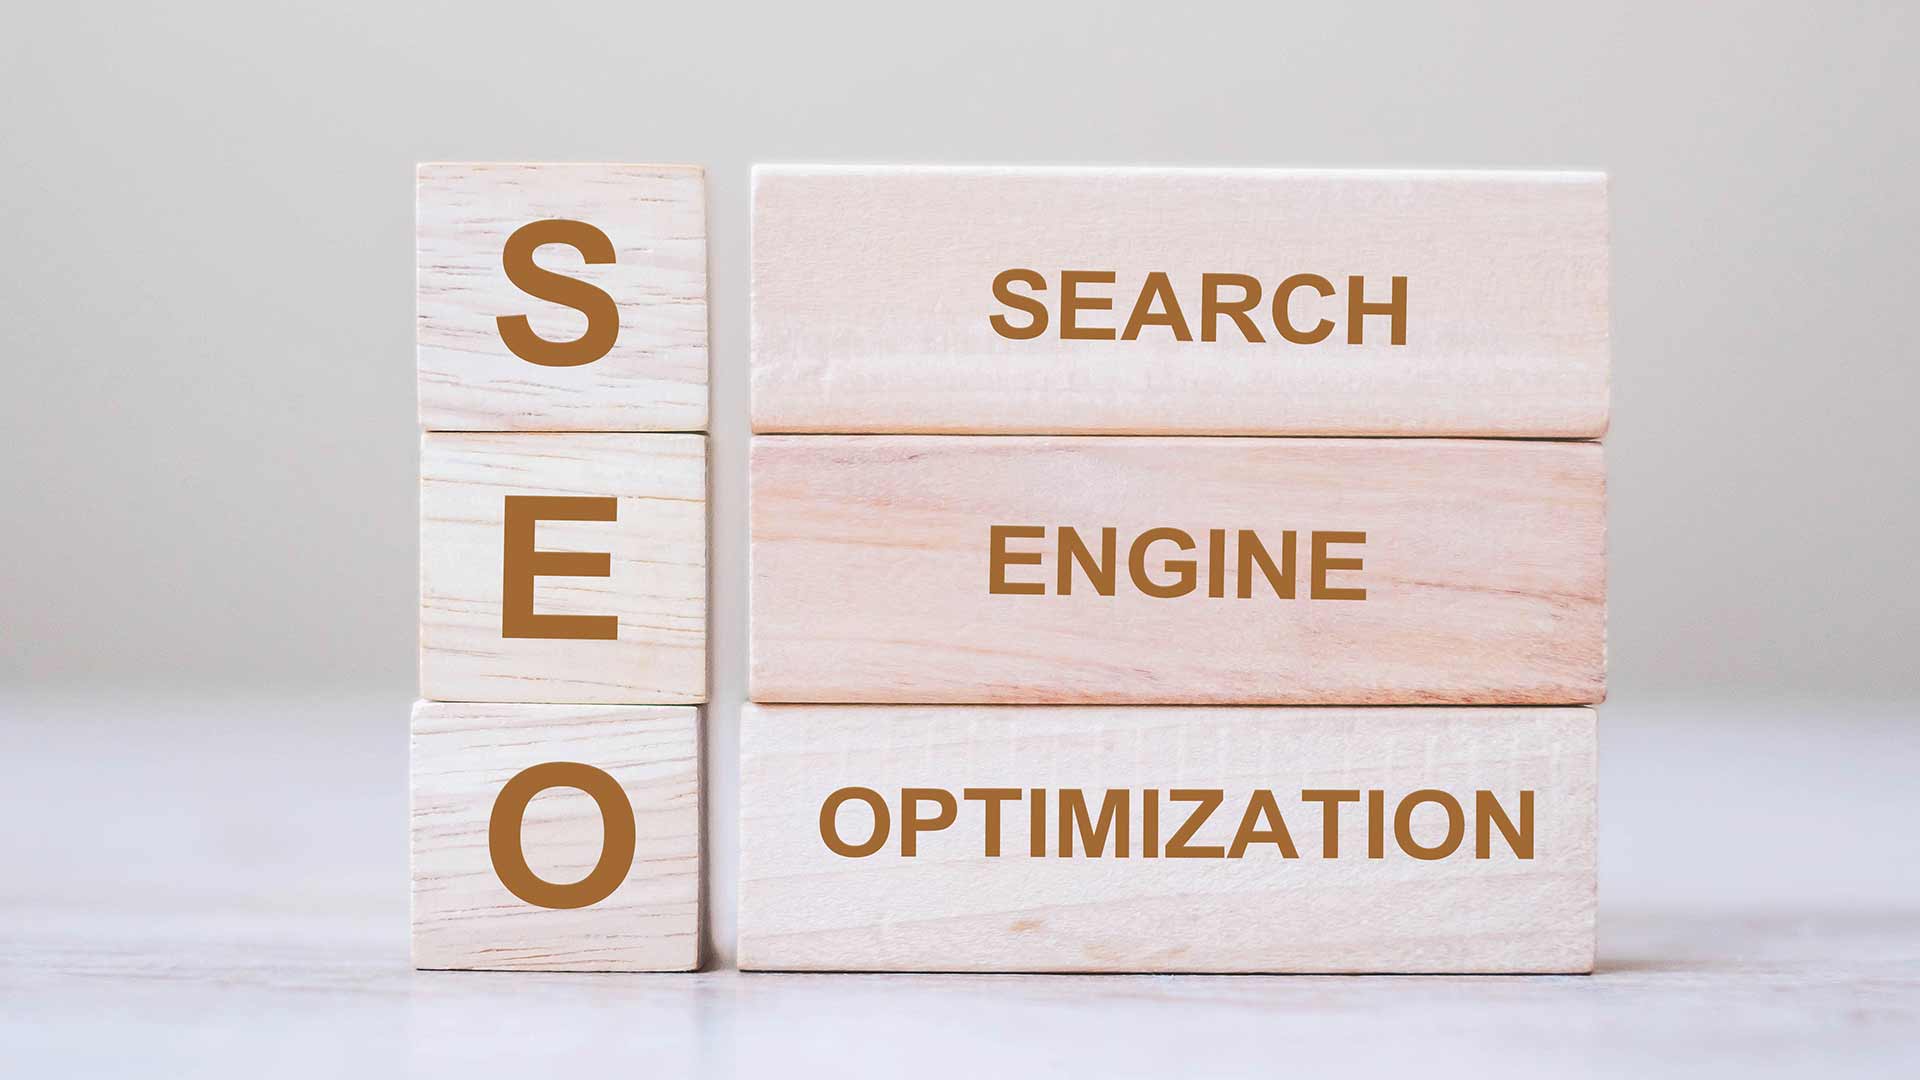 How to Create an Effective SEO Strategy